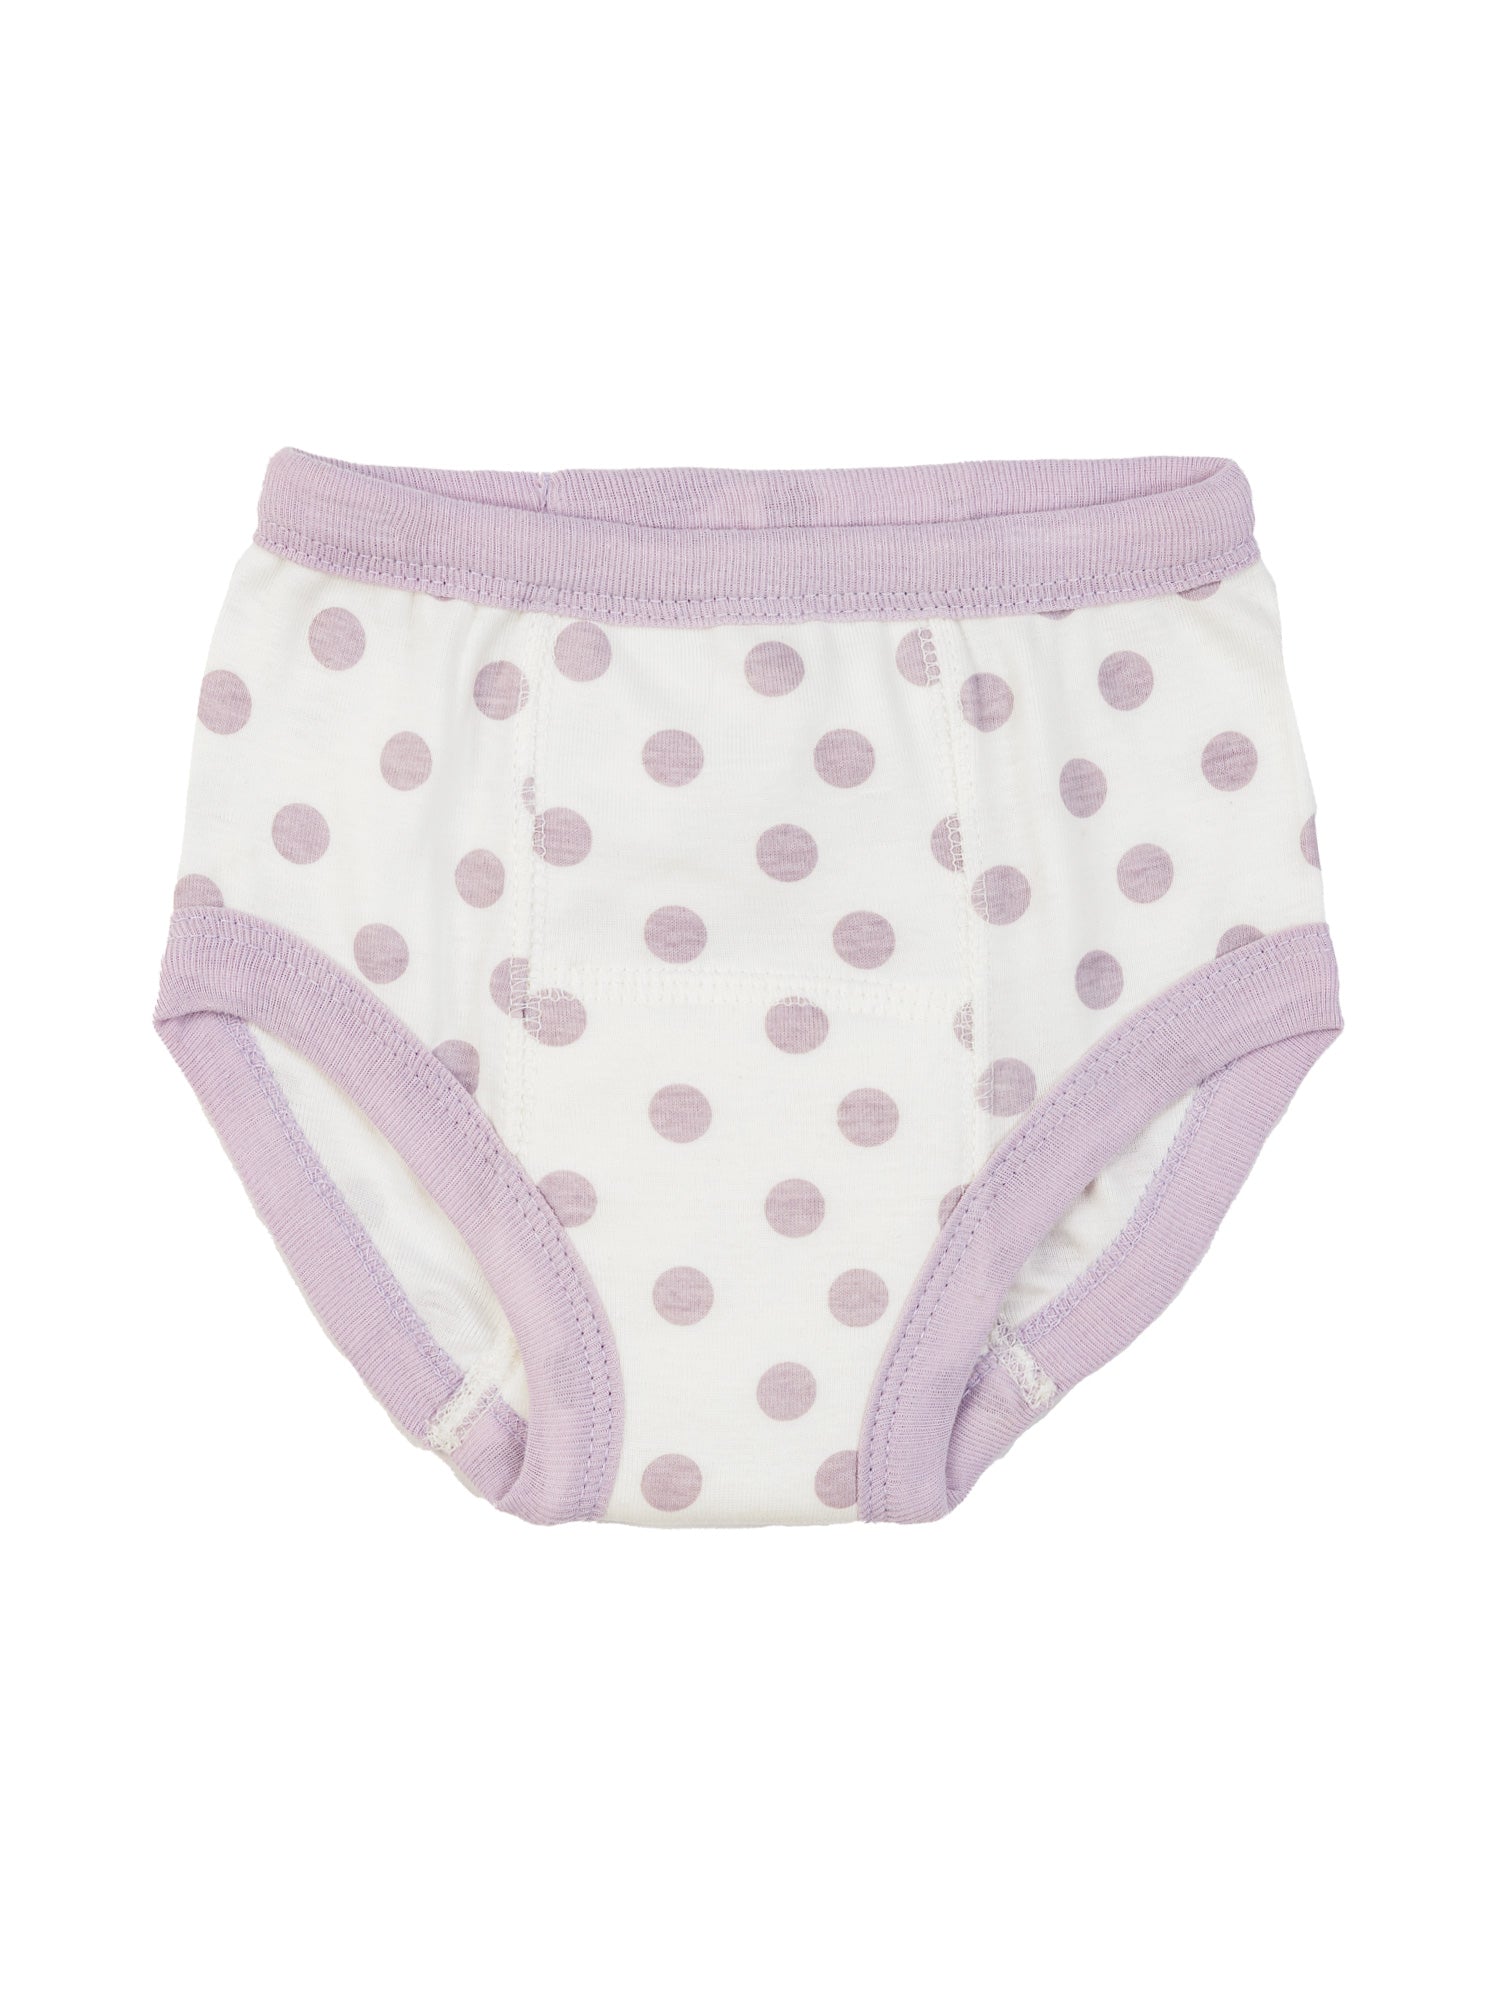 Polka Dot Training Underwear for Toddlers